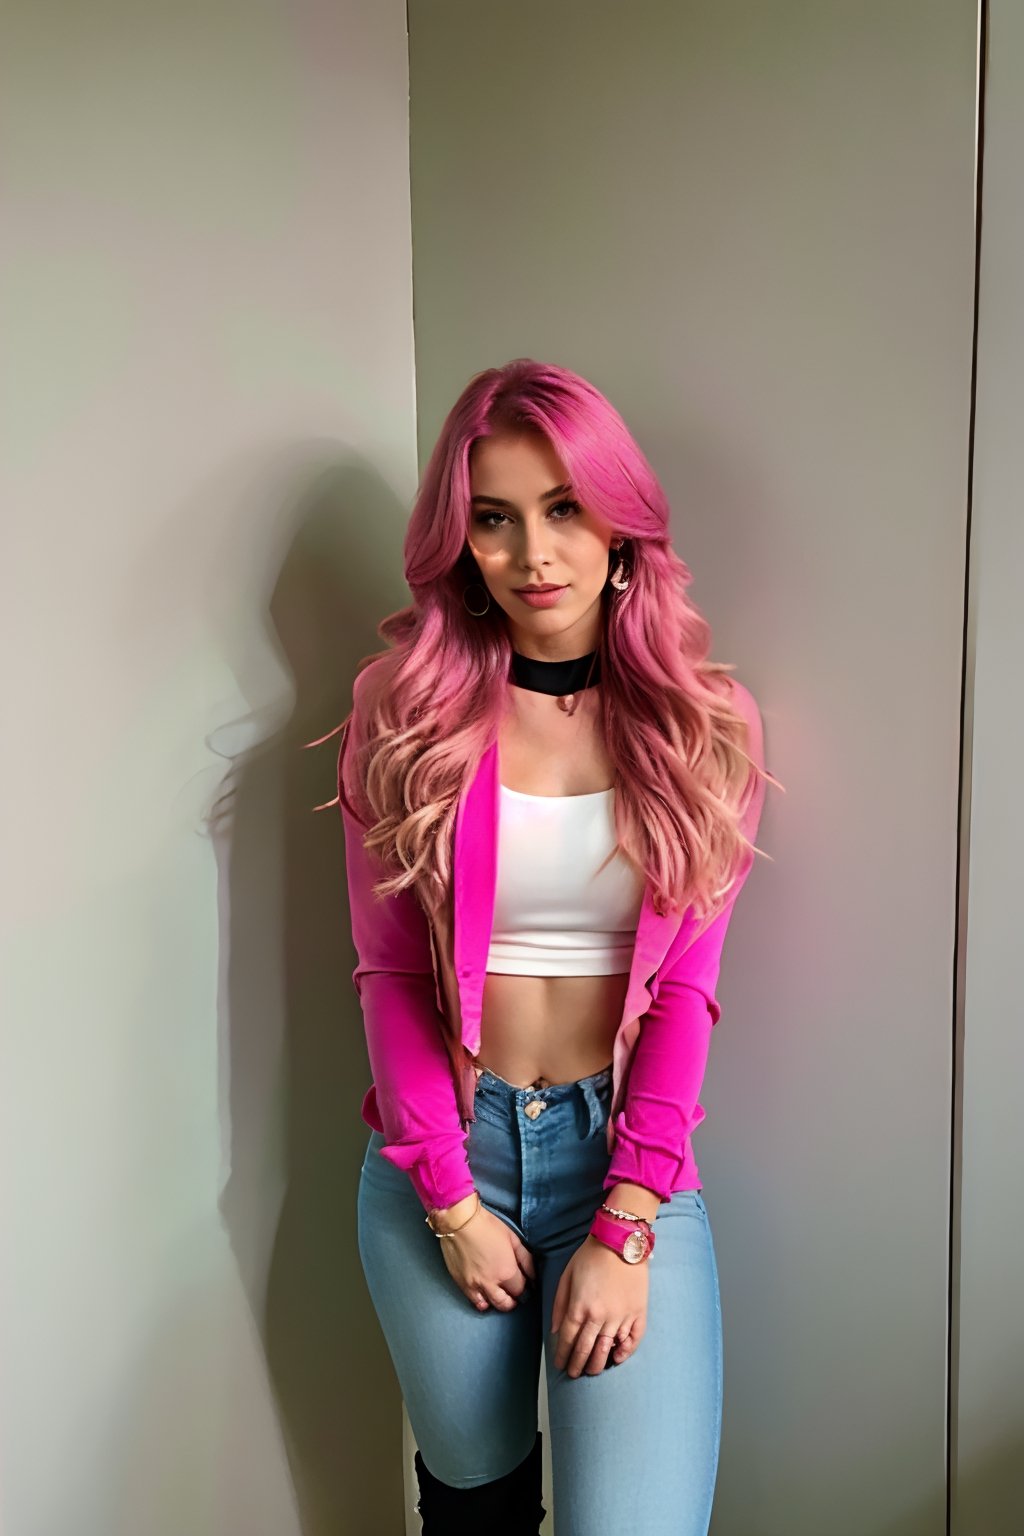 pink hair, long hair with ponytail and fringe, beautiful face, onlyfans model, hot pink lips, pink eyeshadow, wearing cropped denim jacket and tight levis jeans in light blue color,blackbootsnjeans, white girl